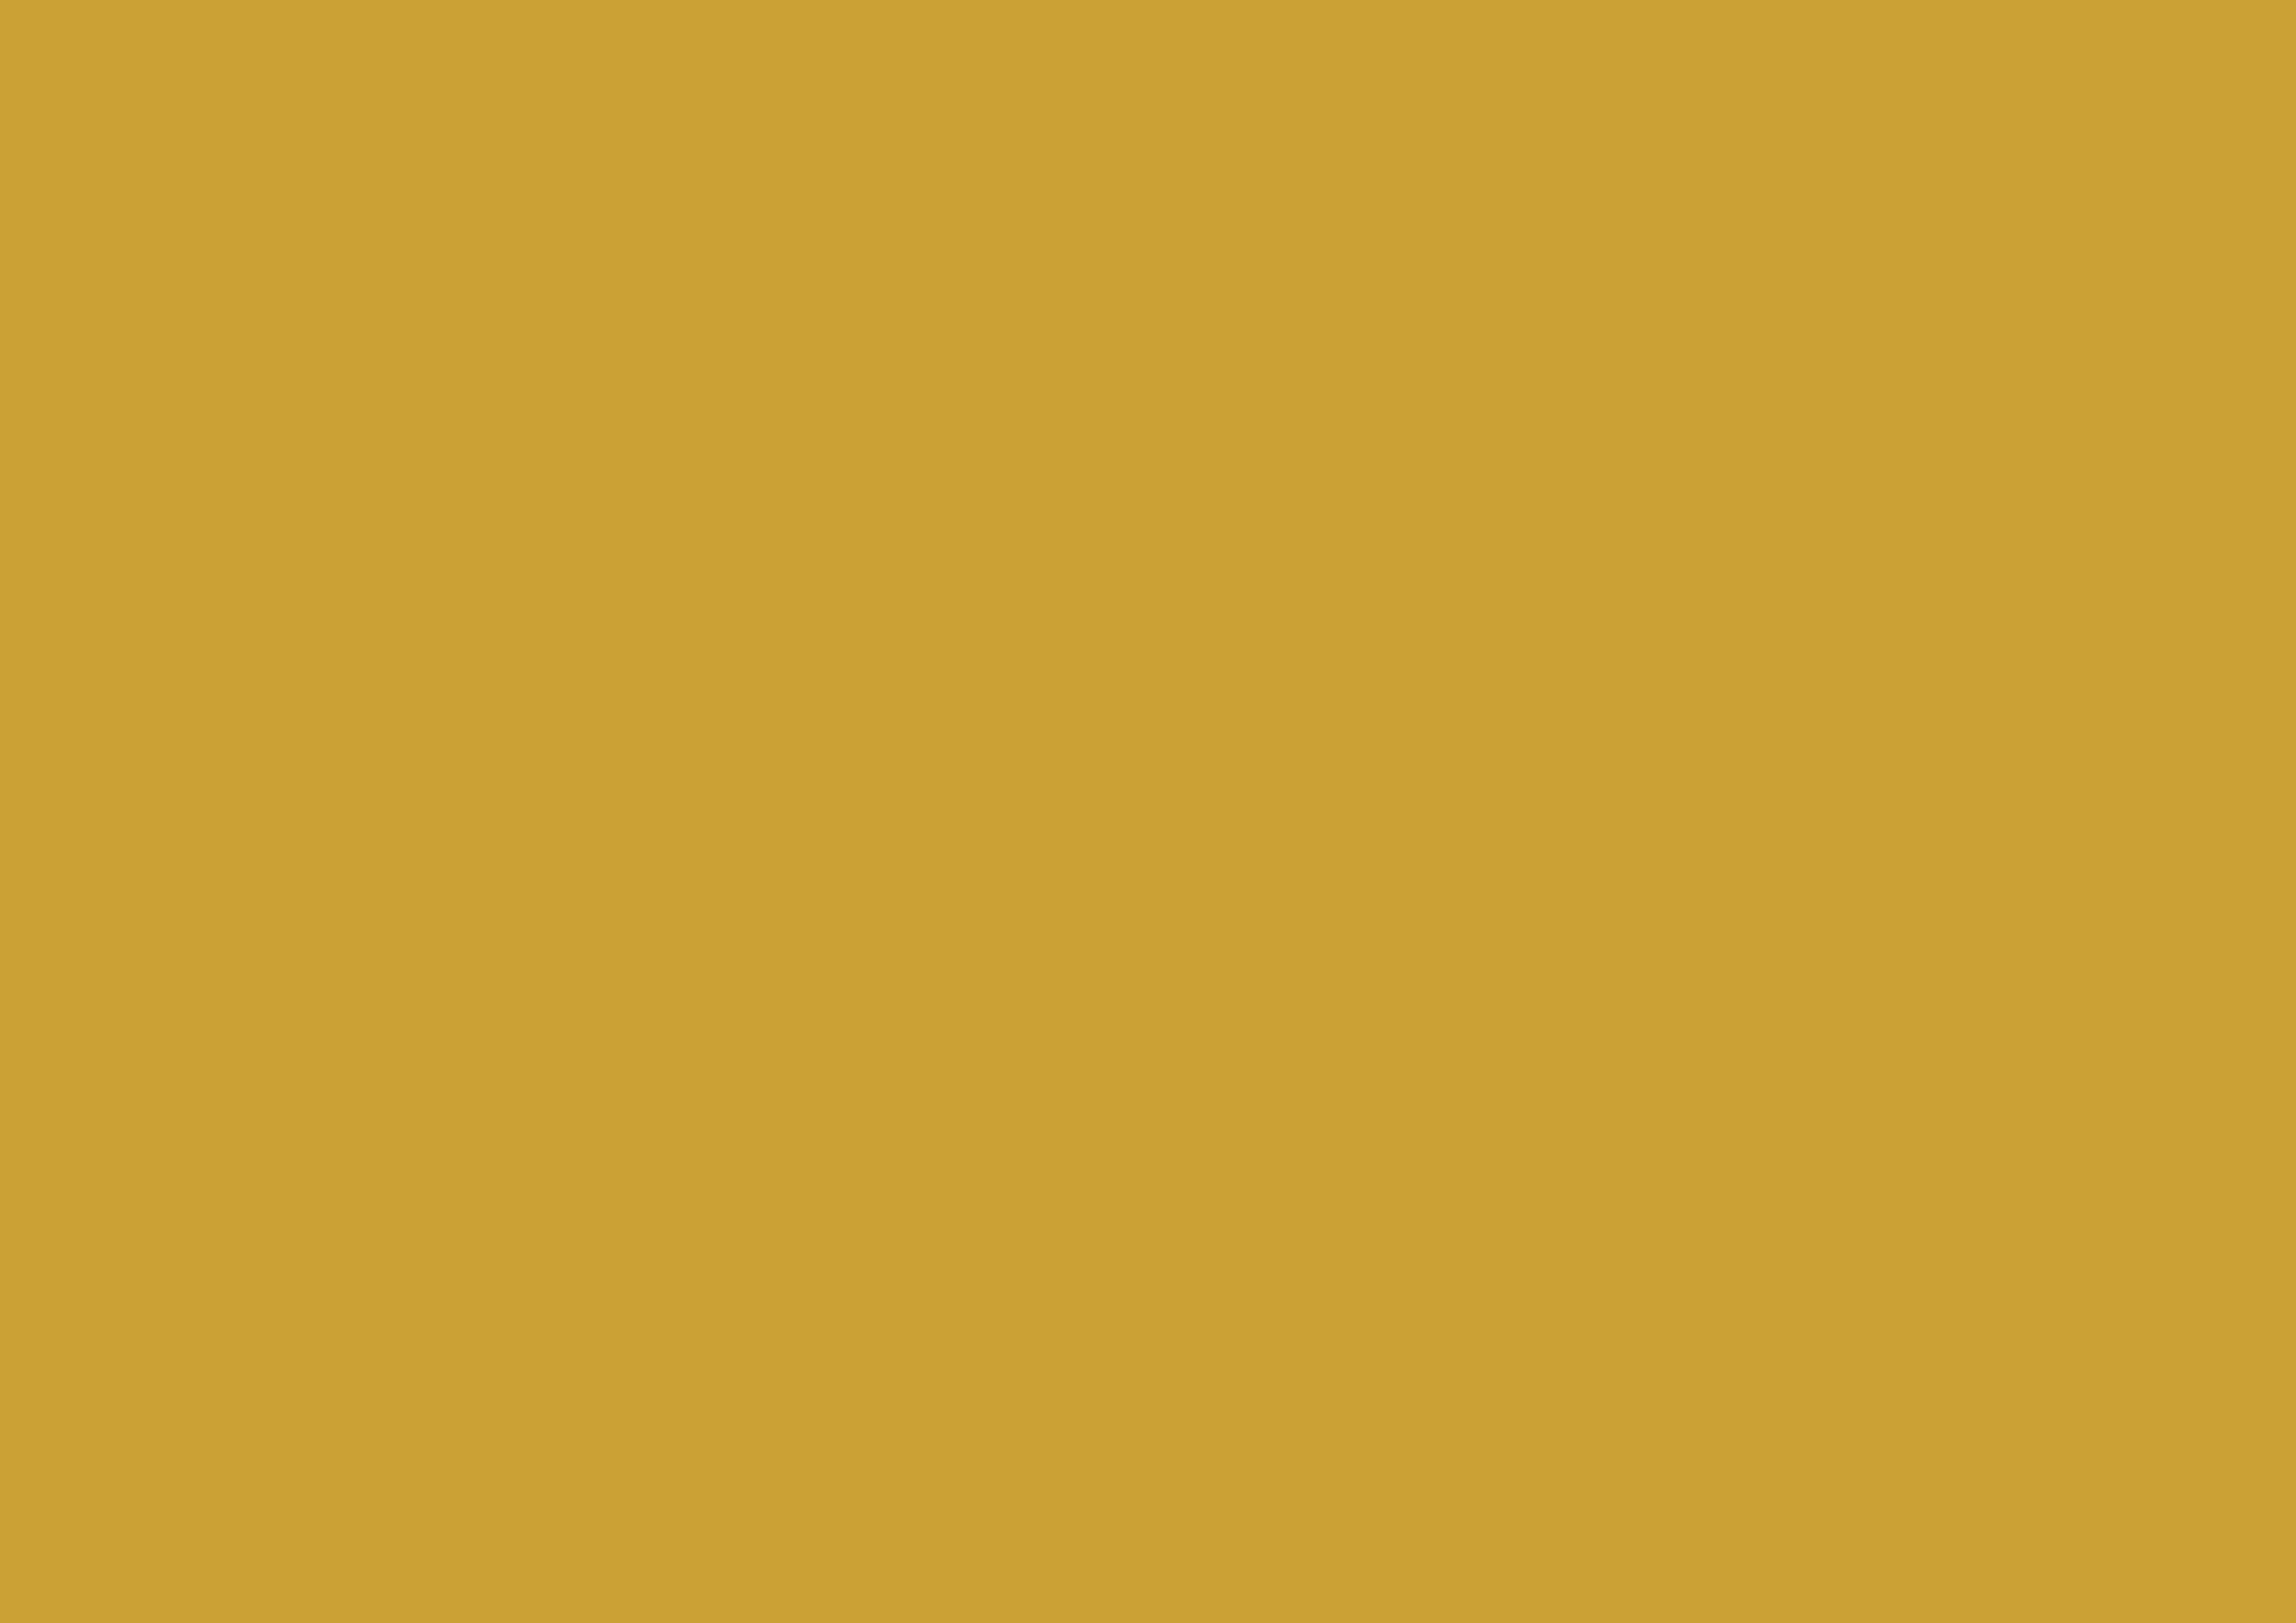 3508x2480 Satin Sheen Gold Solid Color Background